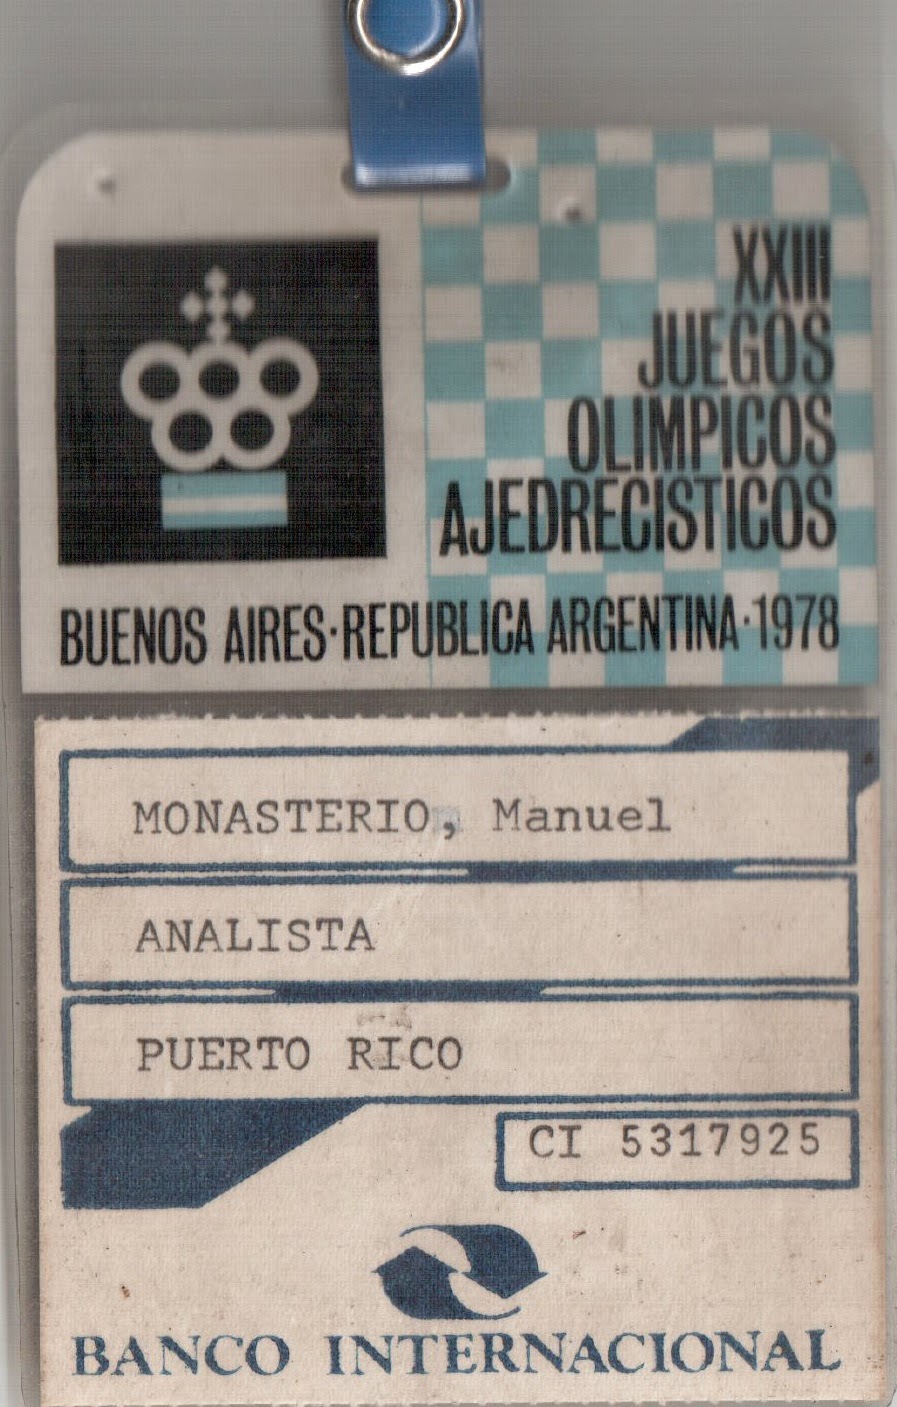 Old Times...My official Badge as Analyst of the Puerto Rico Team at the 1978 Chess Olympiads